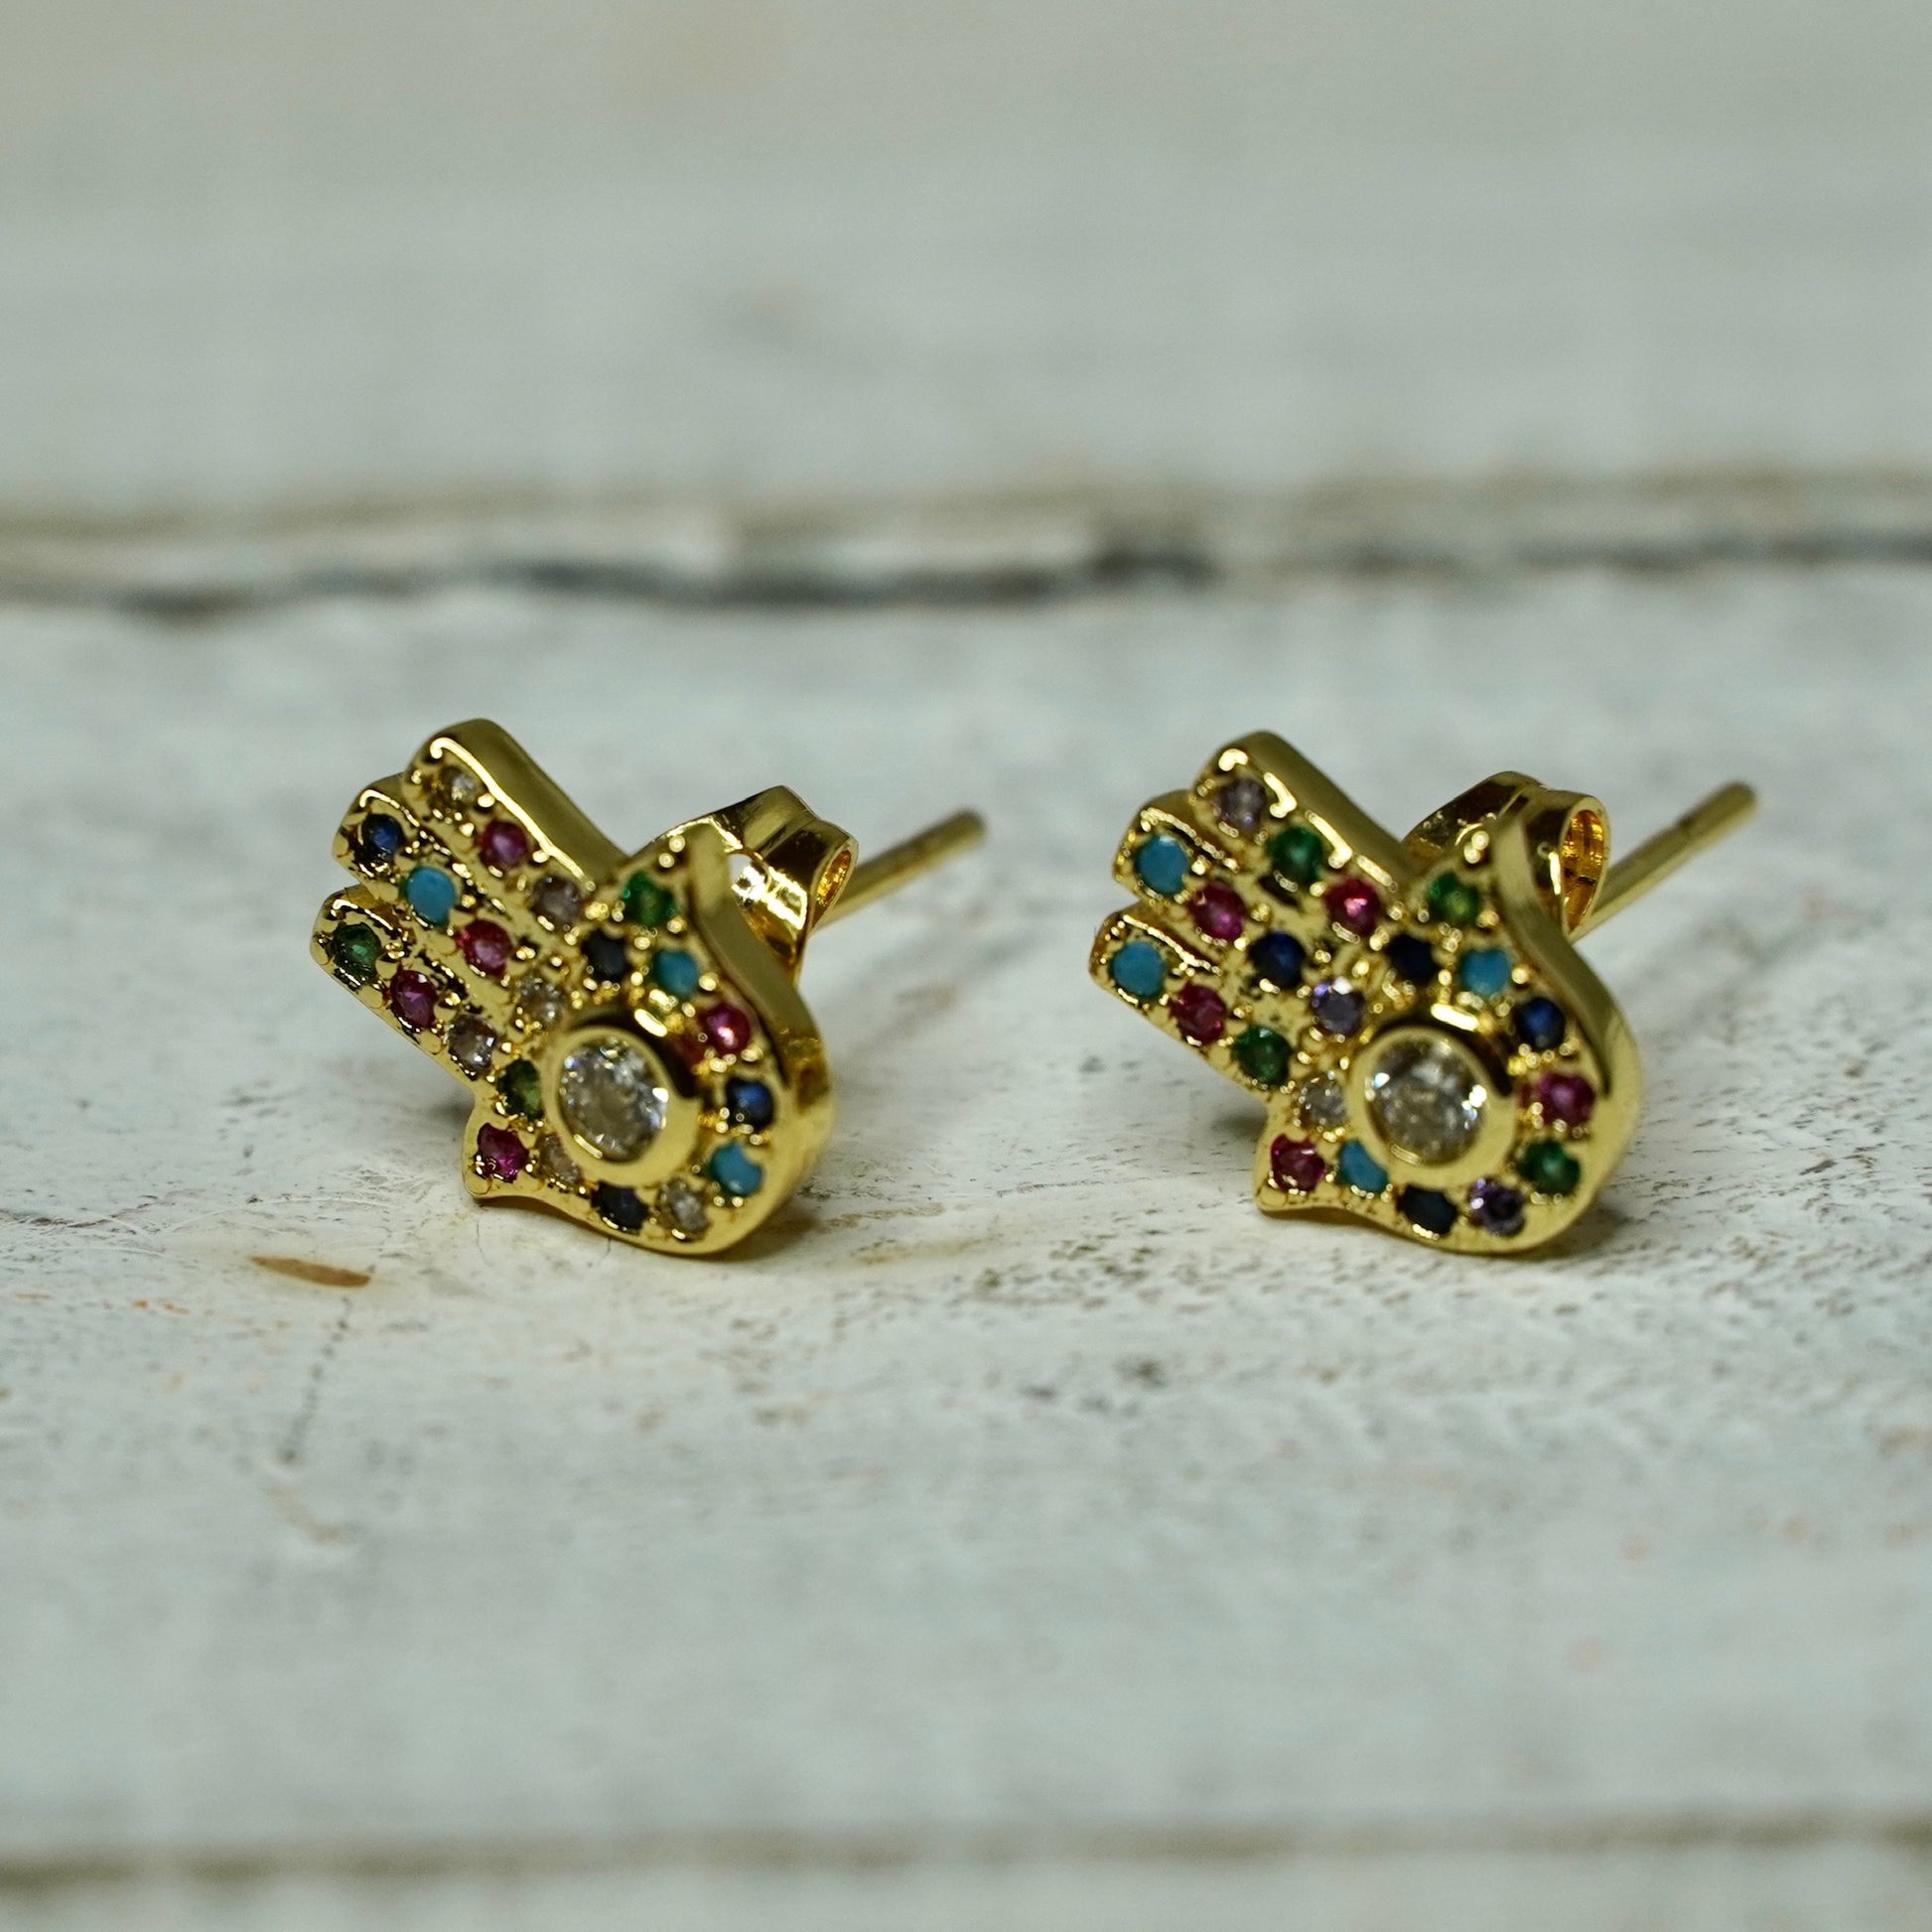 Gold Plated Hamsa Shape Earrings with Small Multicolored Pave in Stud